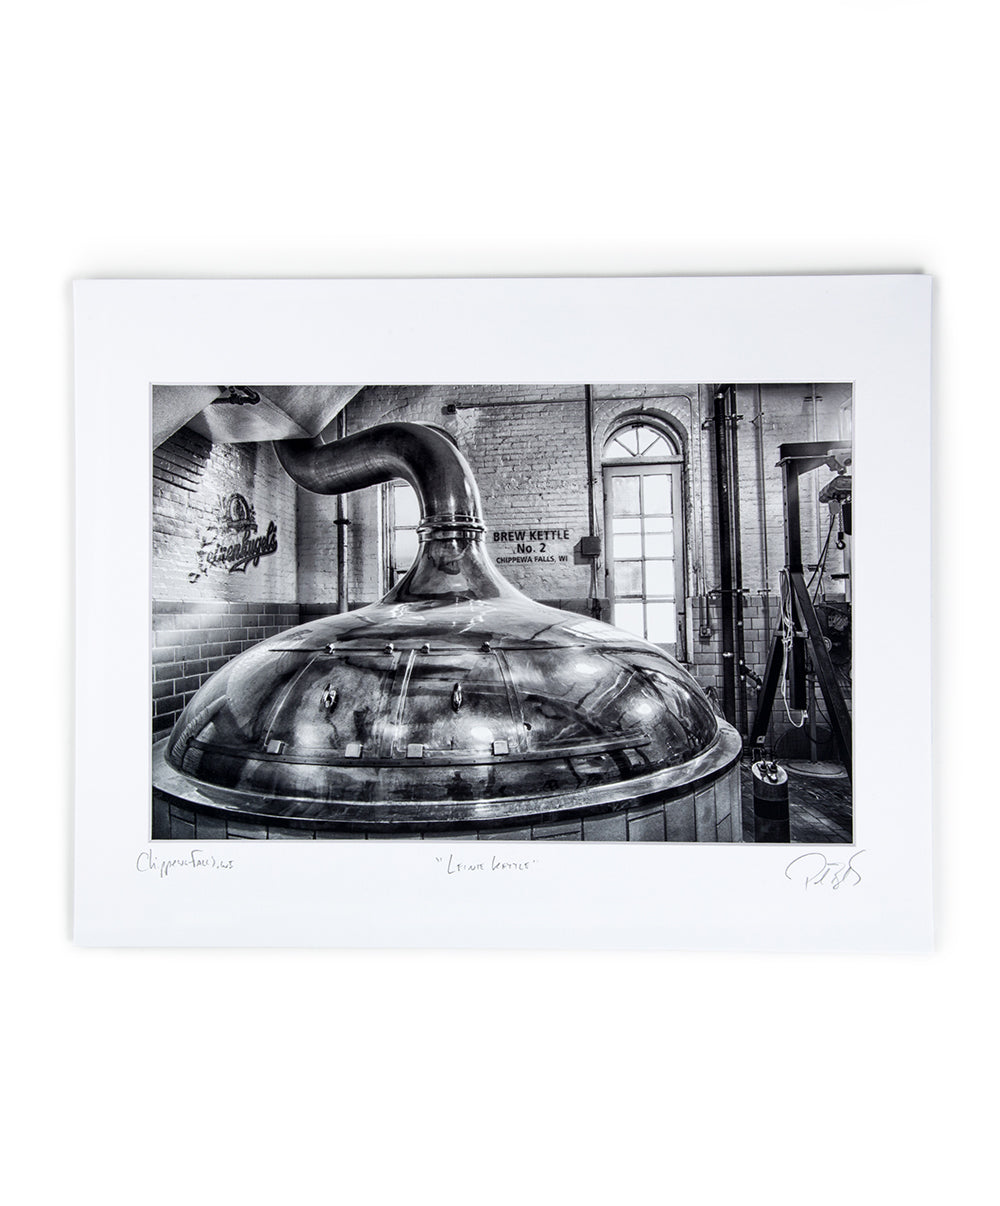 8X12 MATTED BREW KETTLE